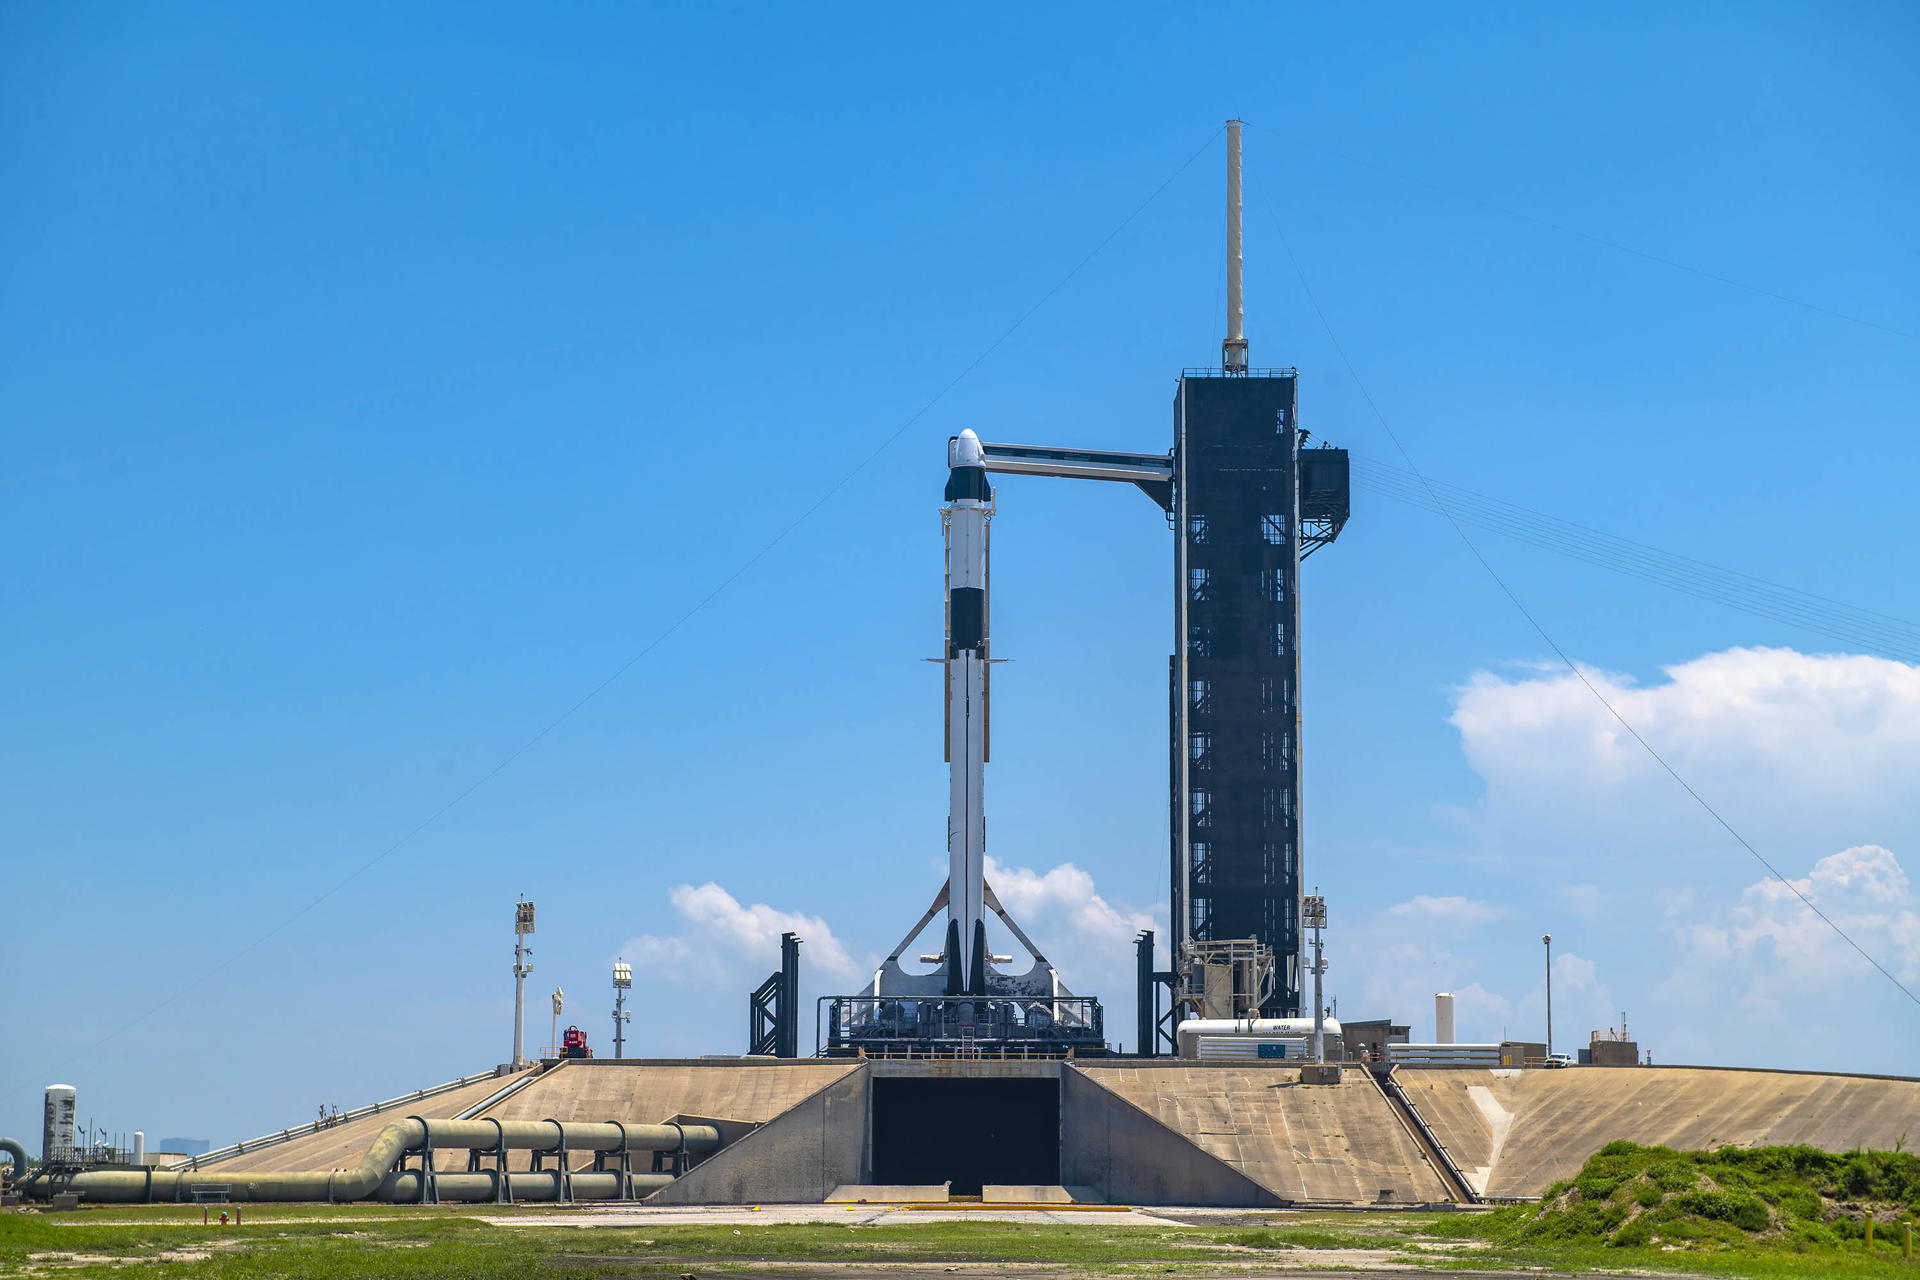 Liftoff of NASA/SpaceX resupply mission to ISS postponed due to high winds